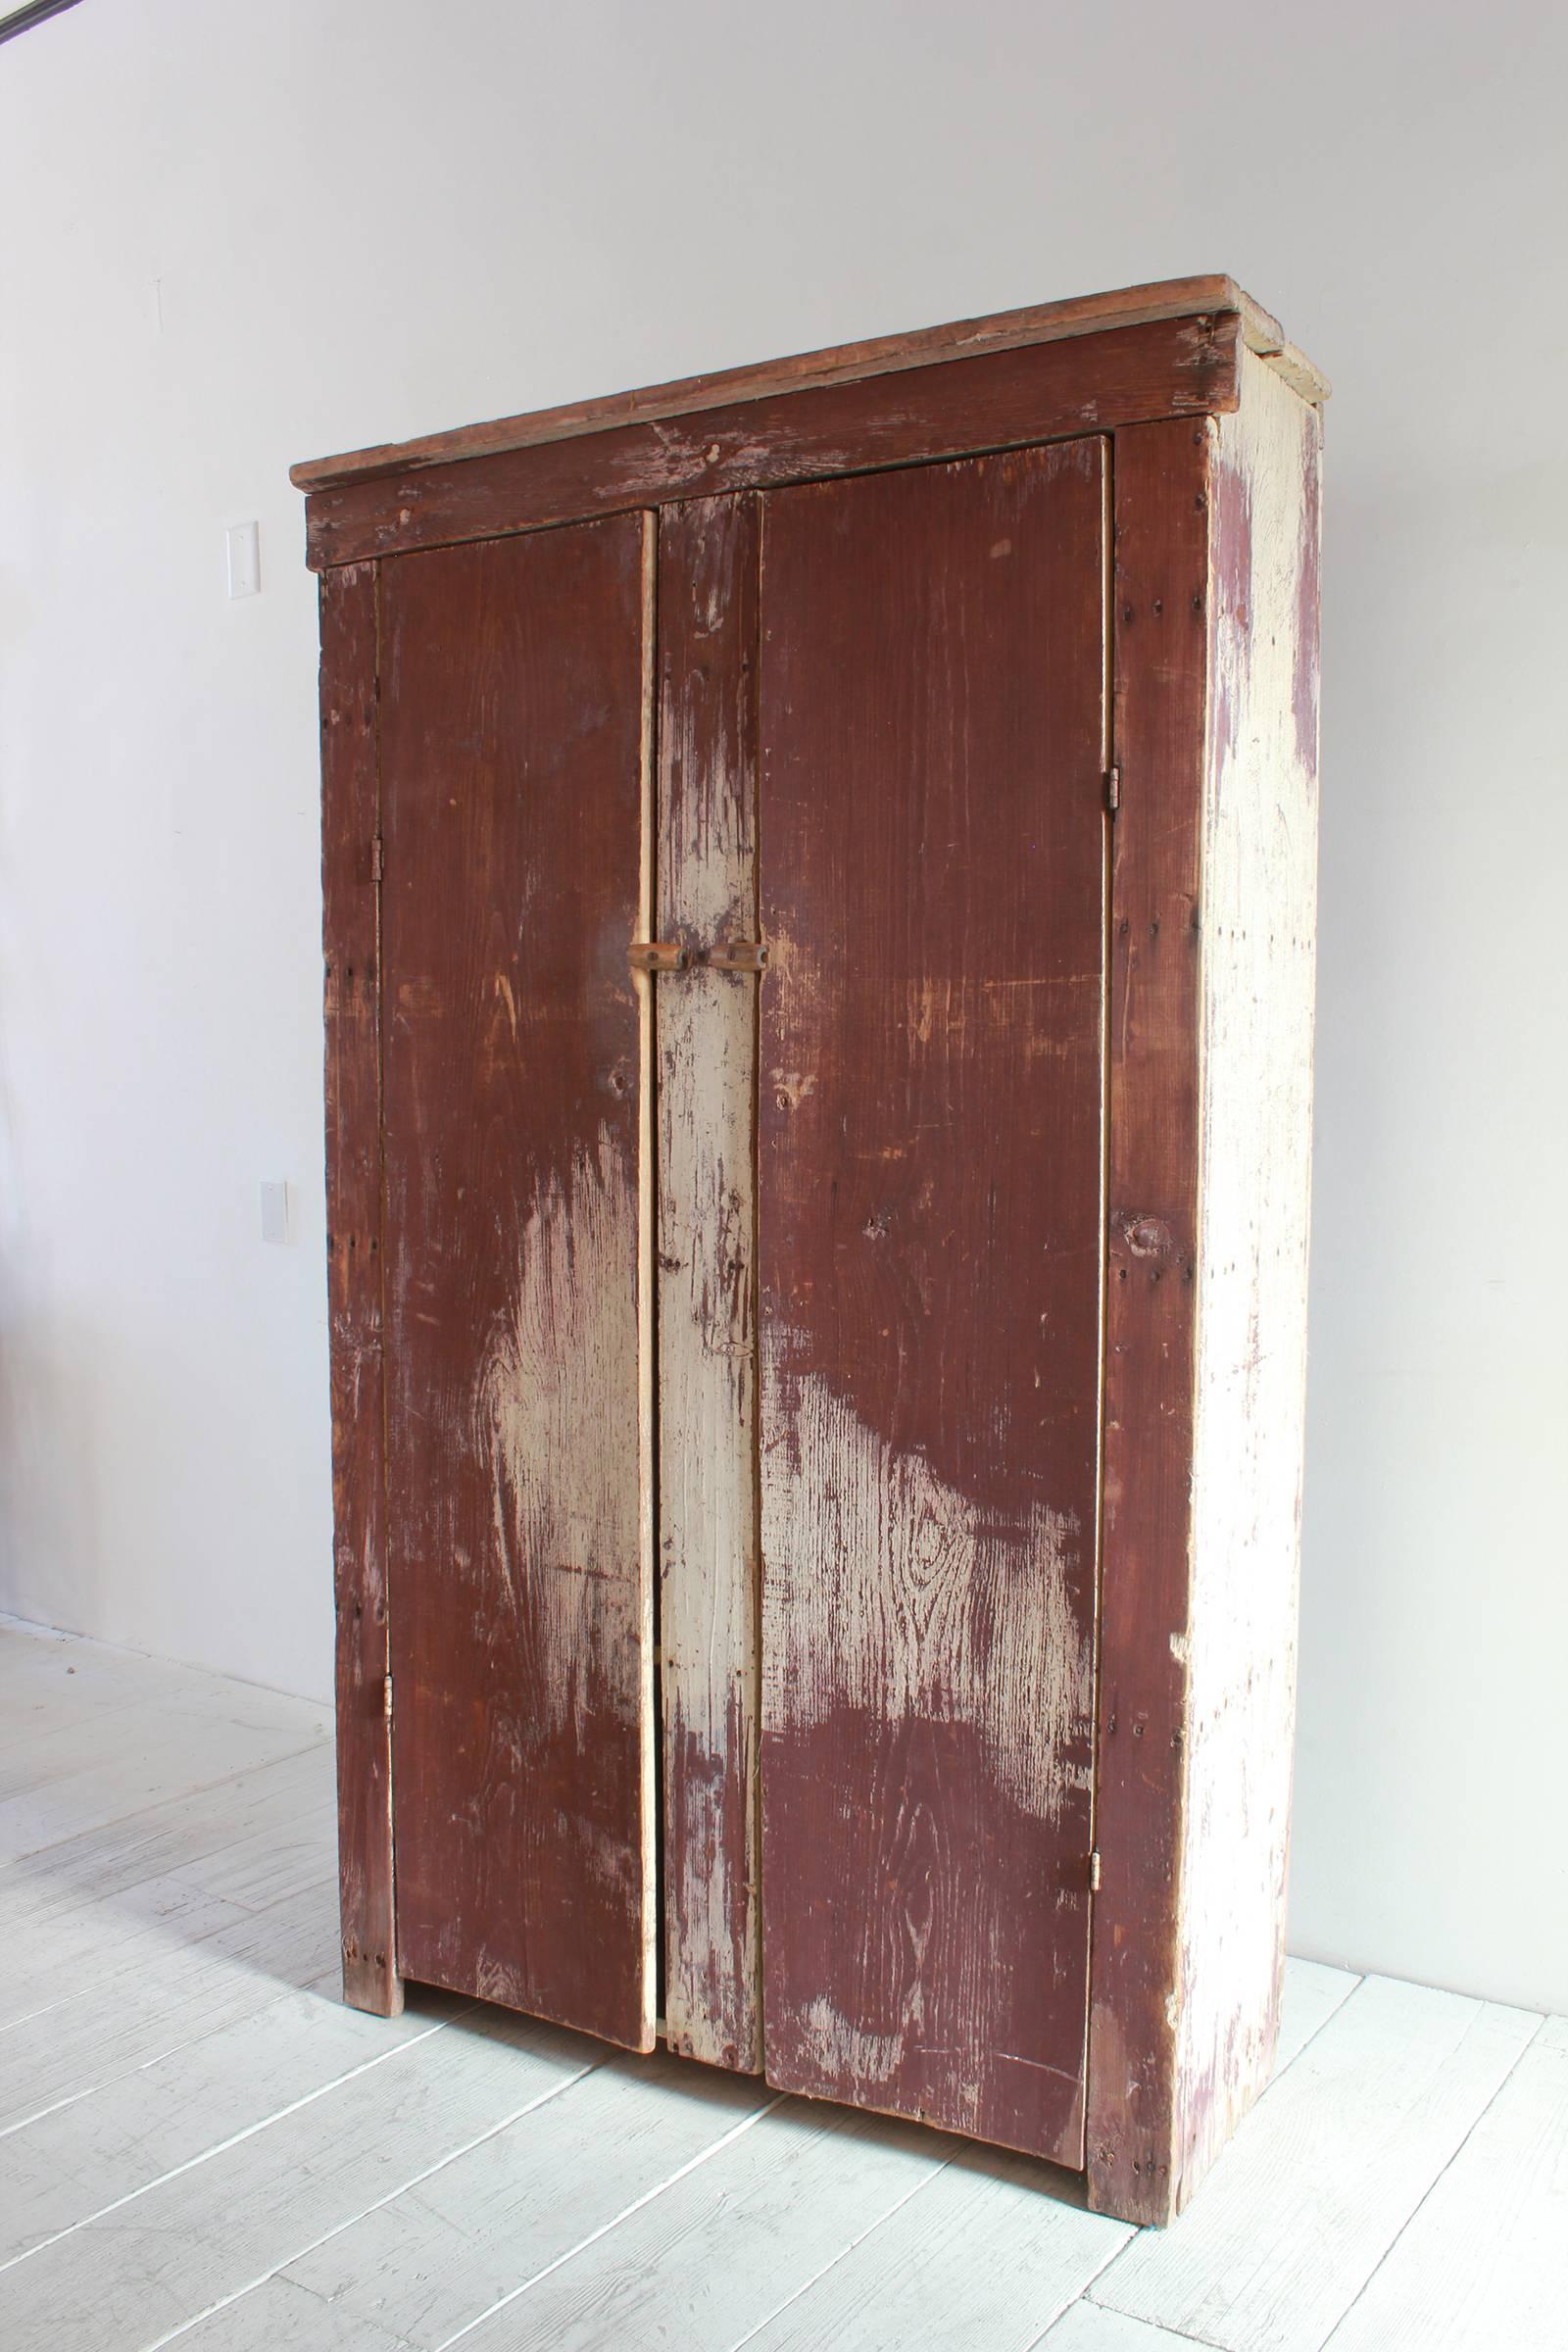 Tall rustic two door painted cabinet with interior shelves.